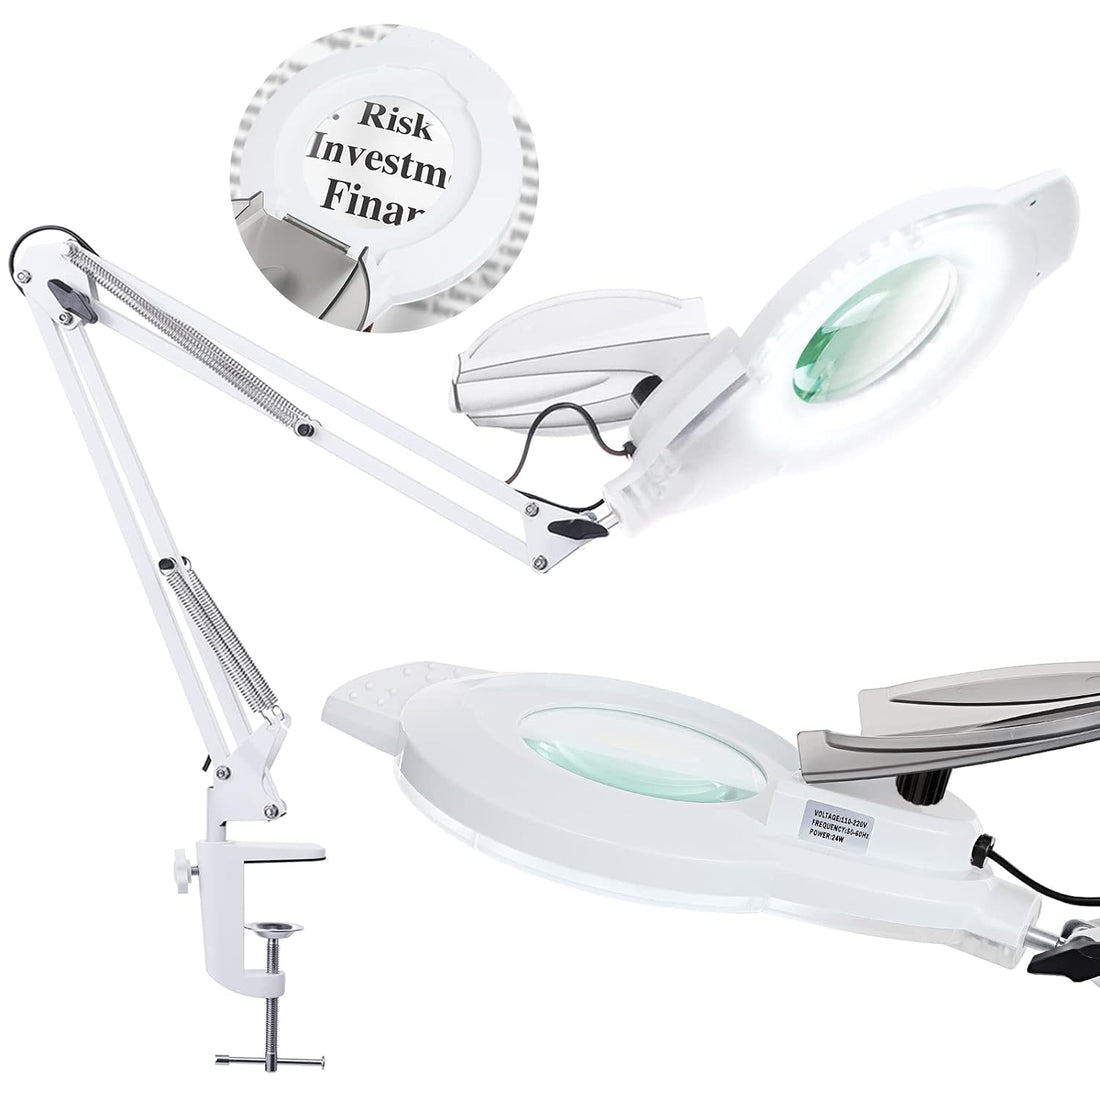 5X Magnifying Glass with Light, NUEYiO 2200 Lumen Stepless Dimmable Magnifying Lamp, 4.1" Real Glass Lens, Adjustable Swing Arm Lighted Magnifier Desk Lamp for Repair, Crafts, Close Work. (White)